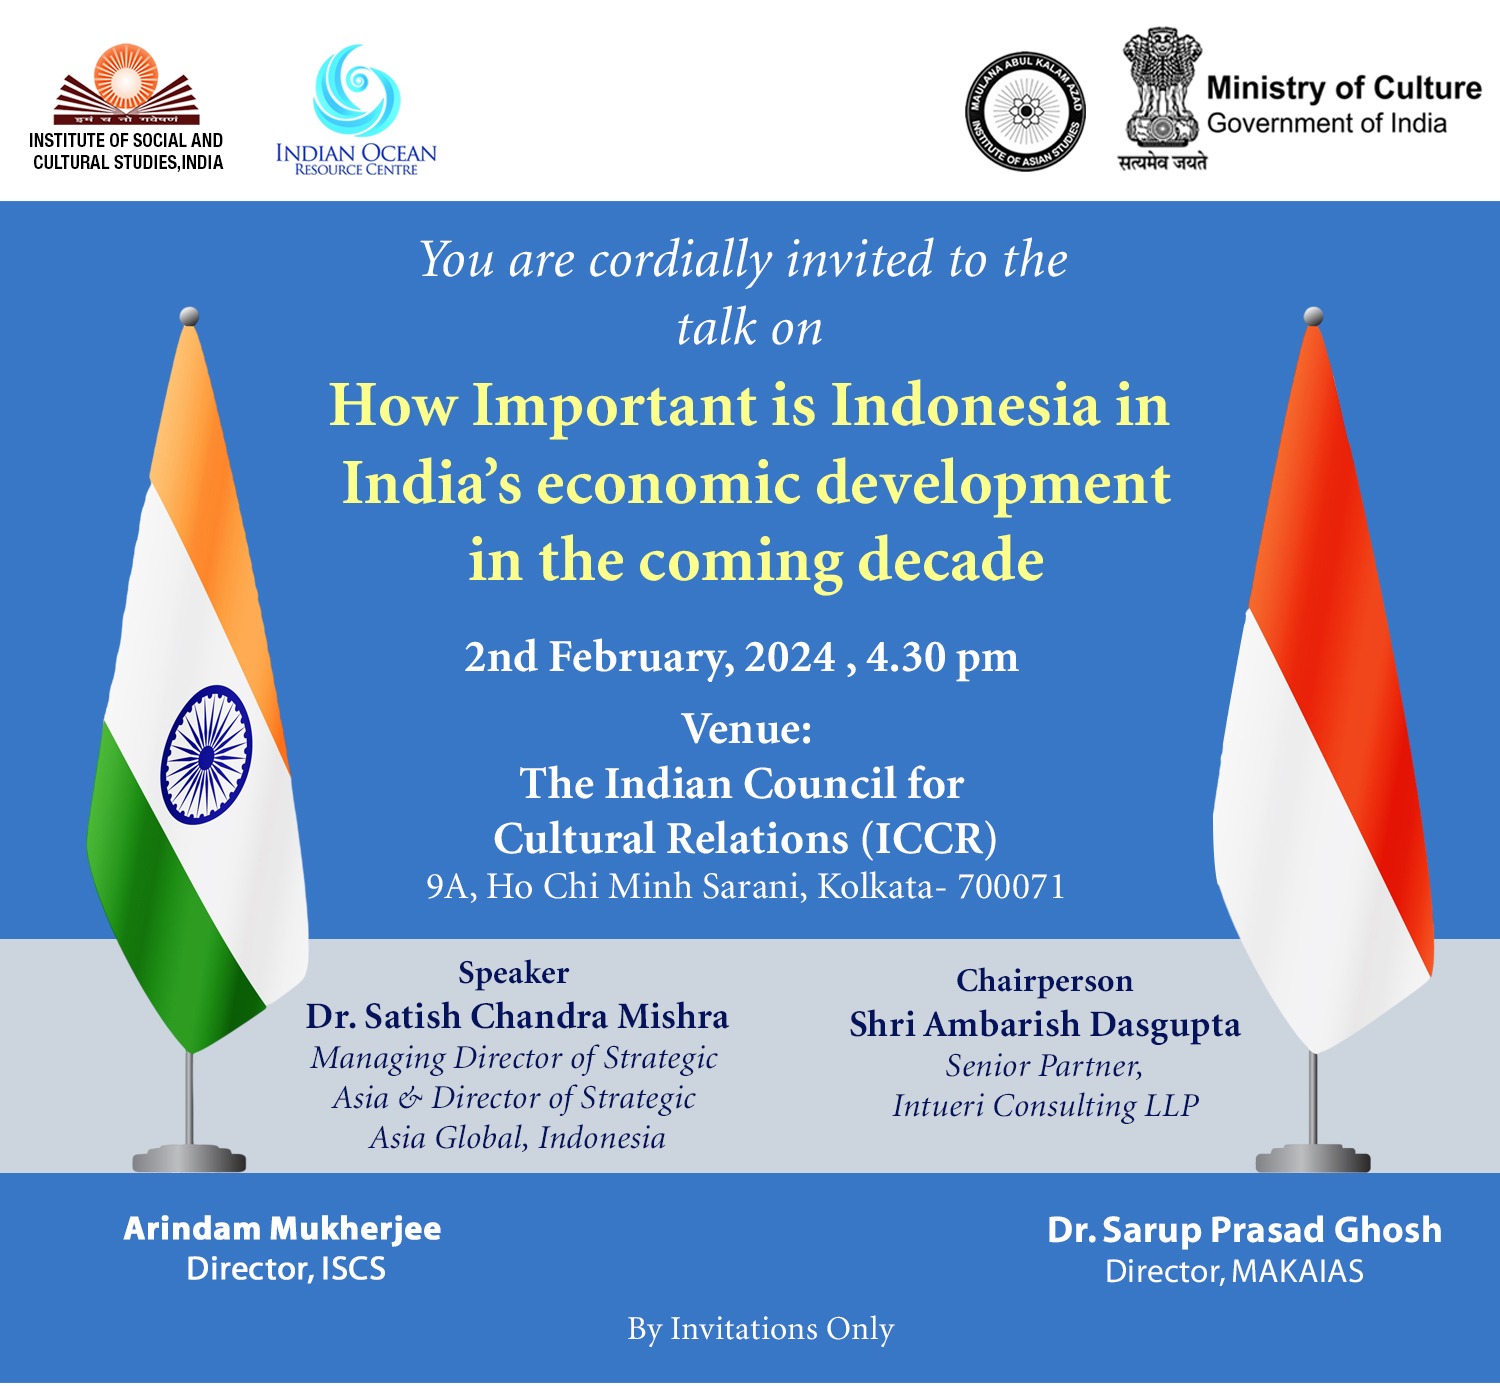 Collaborative Talk on “How Important is Indonesia in India’s economic development in the coming decade”